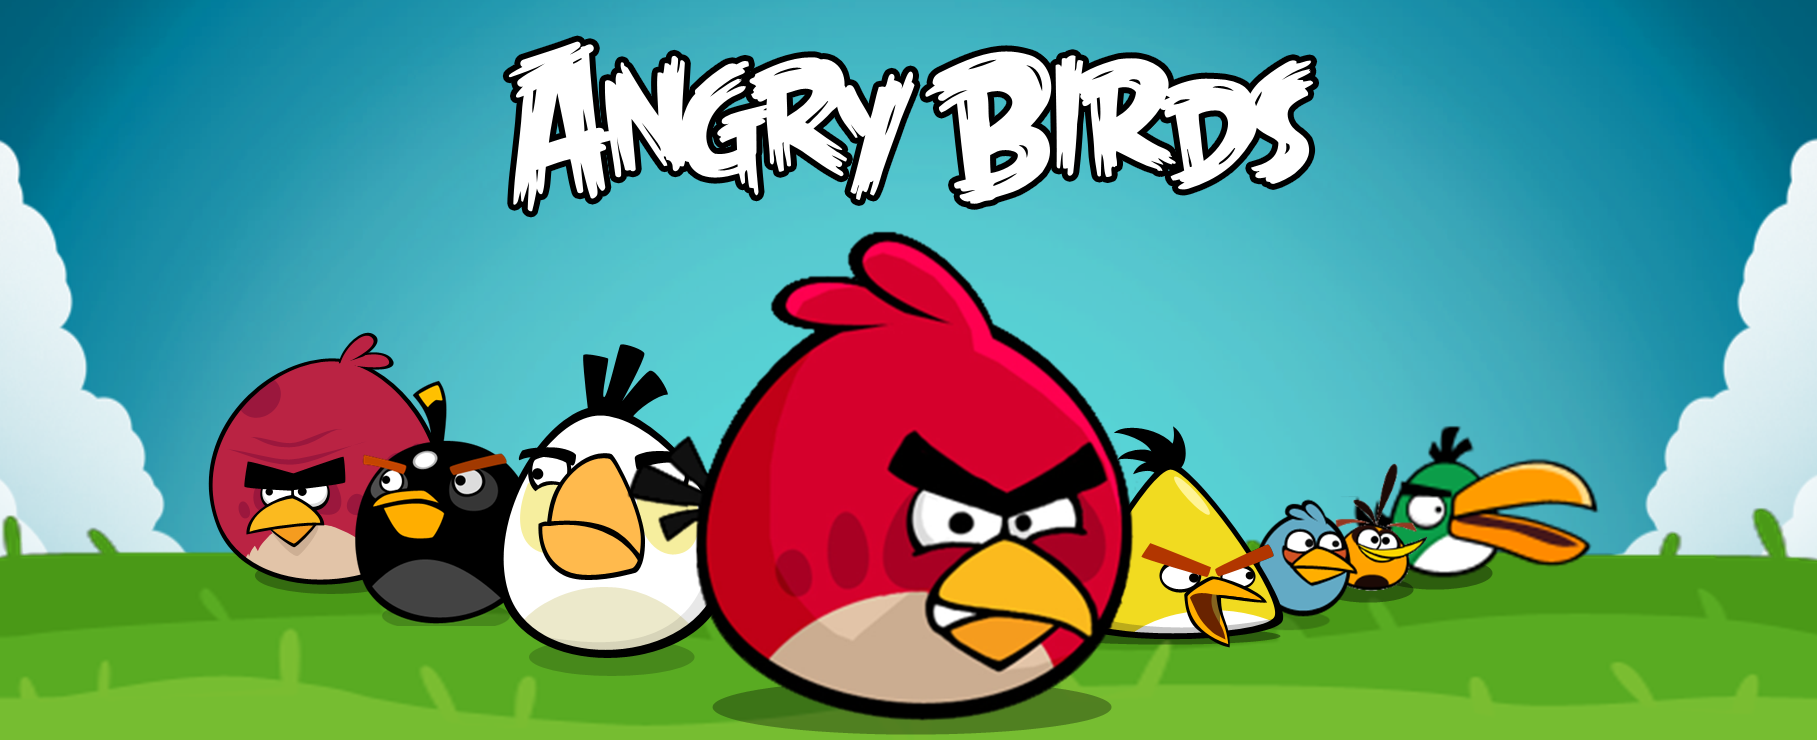 Image Angry Birds Wallpaper 3png Angry Birds Wiki